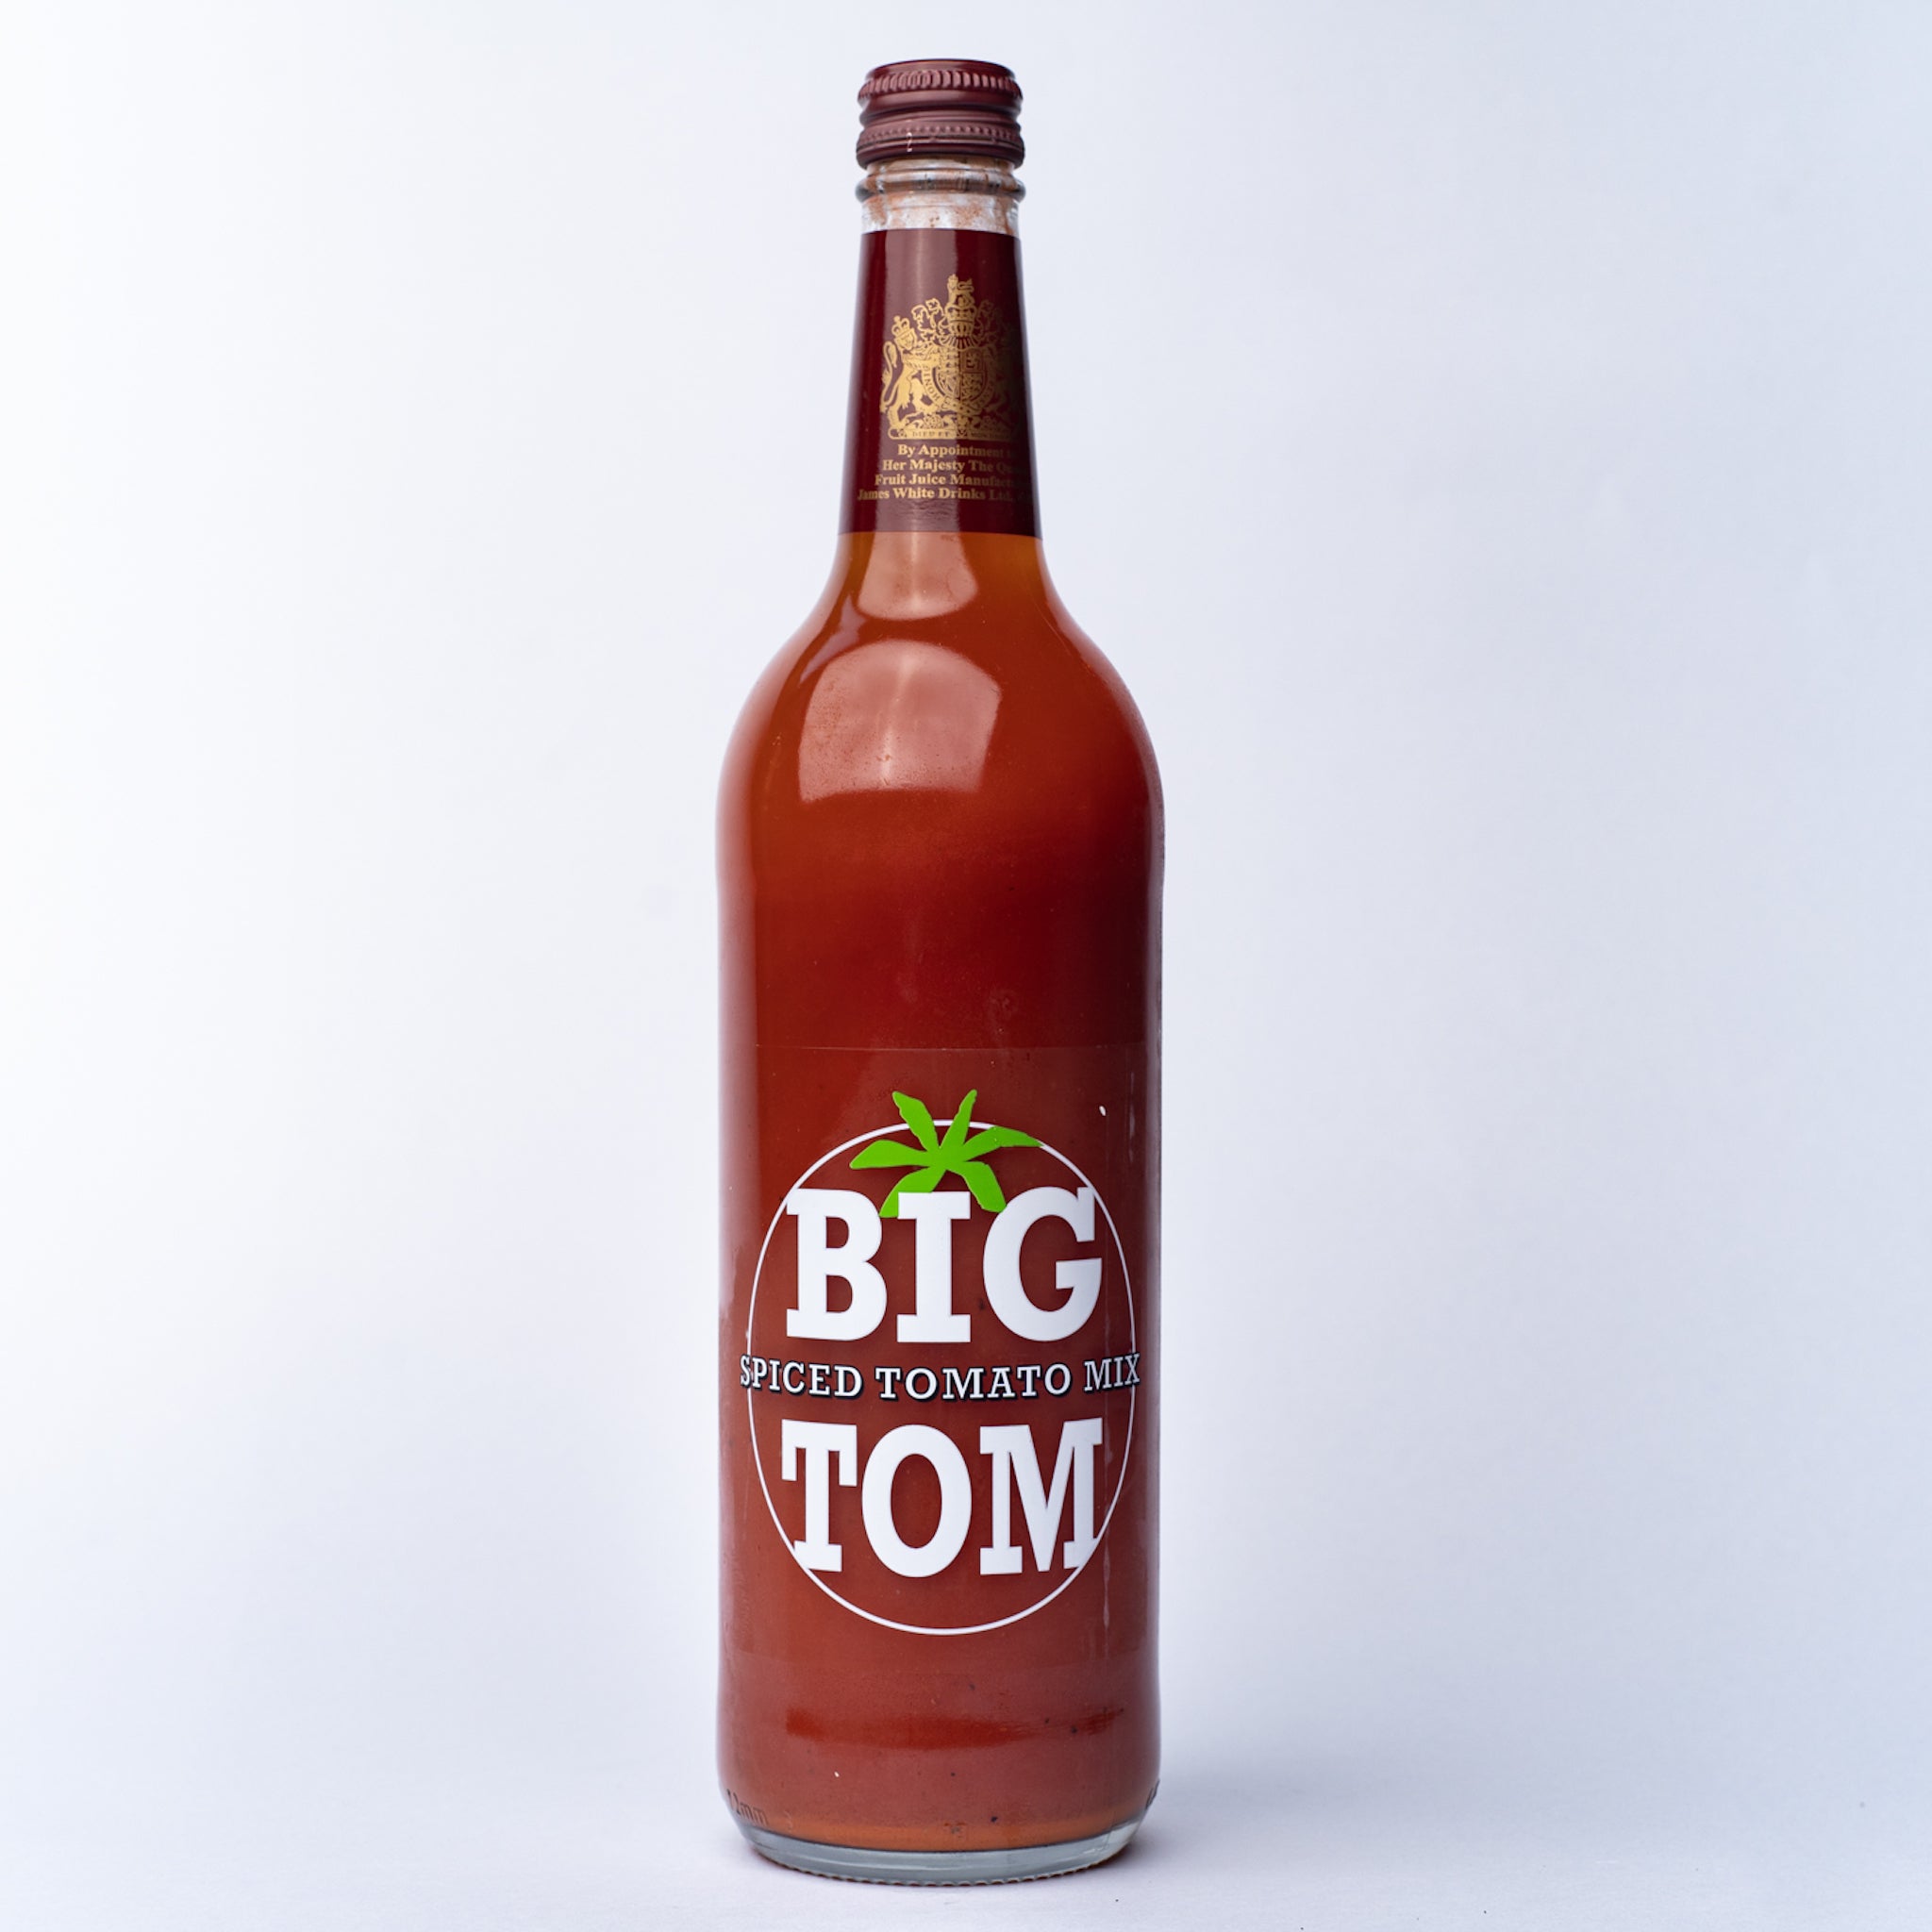 A bottle of Big Tom Spiced Tomato Mix 750ml.